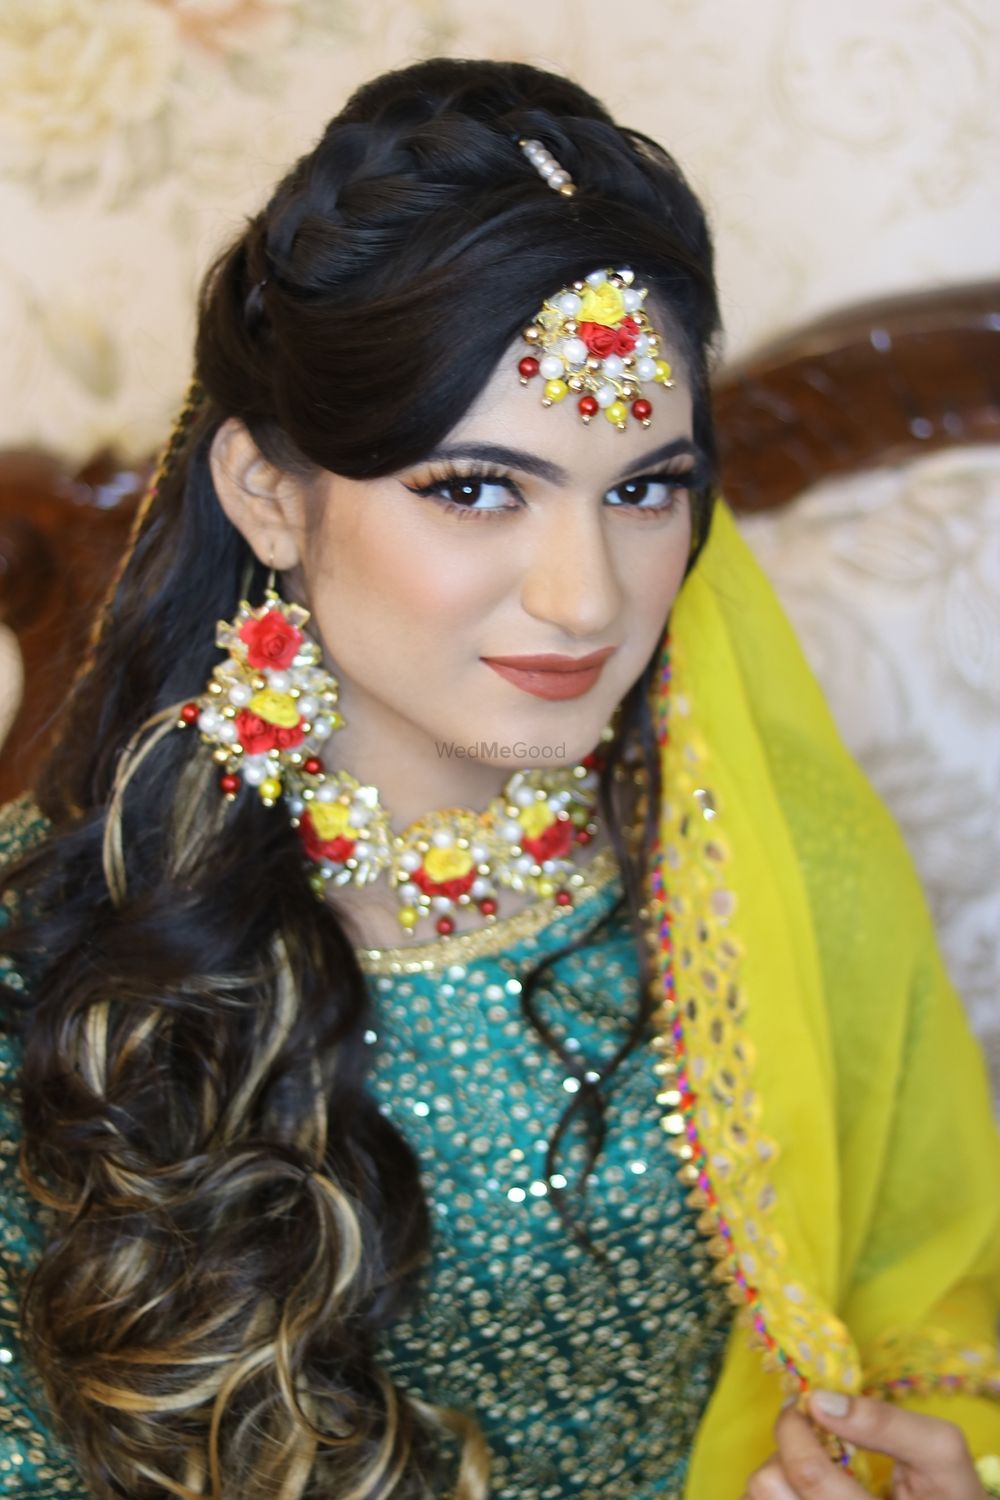 Photo From Muslim Brides - By Makeup by Iman Zaidi